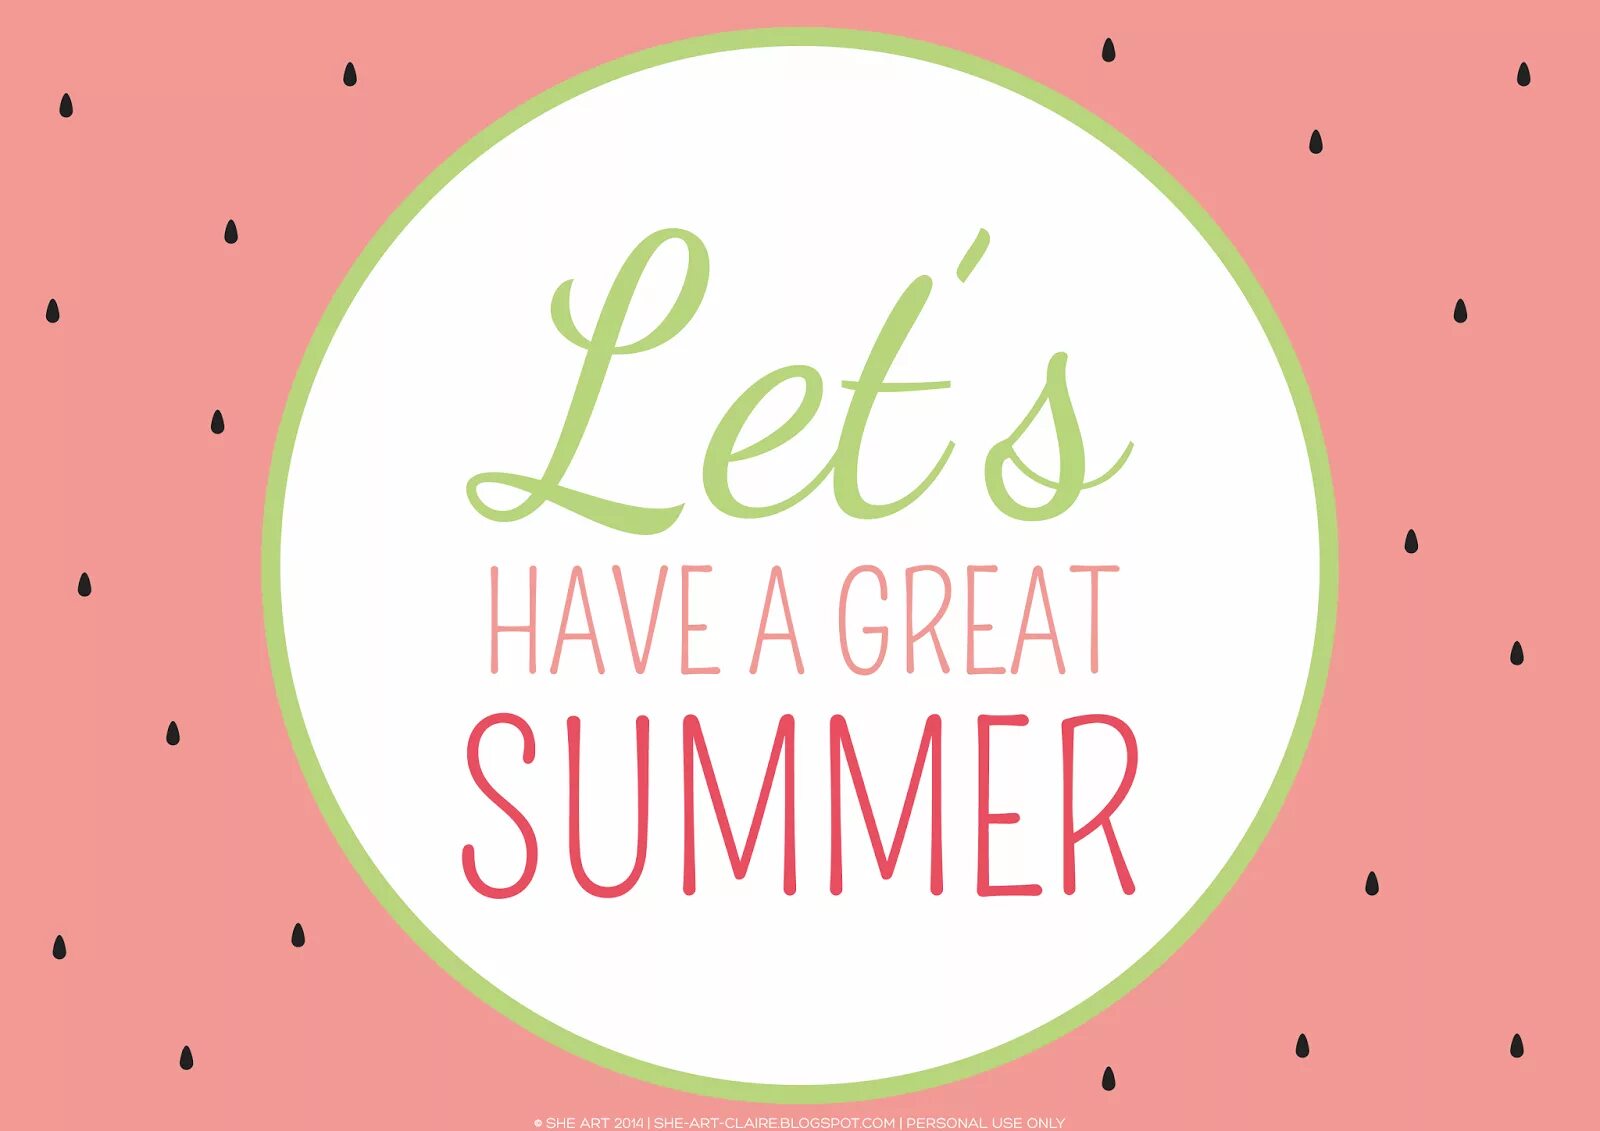 Have a great year. Summer quotes. Have a great Summer. Have good Summer Holidays. Have a great Summer Holidays.